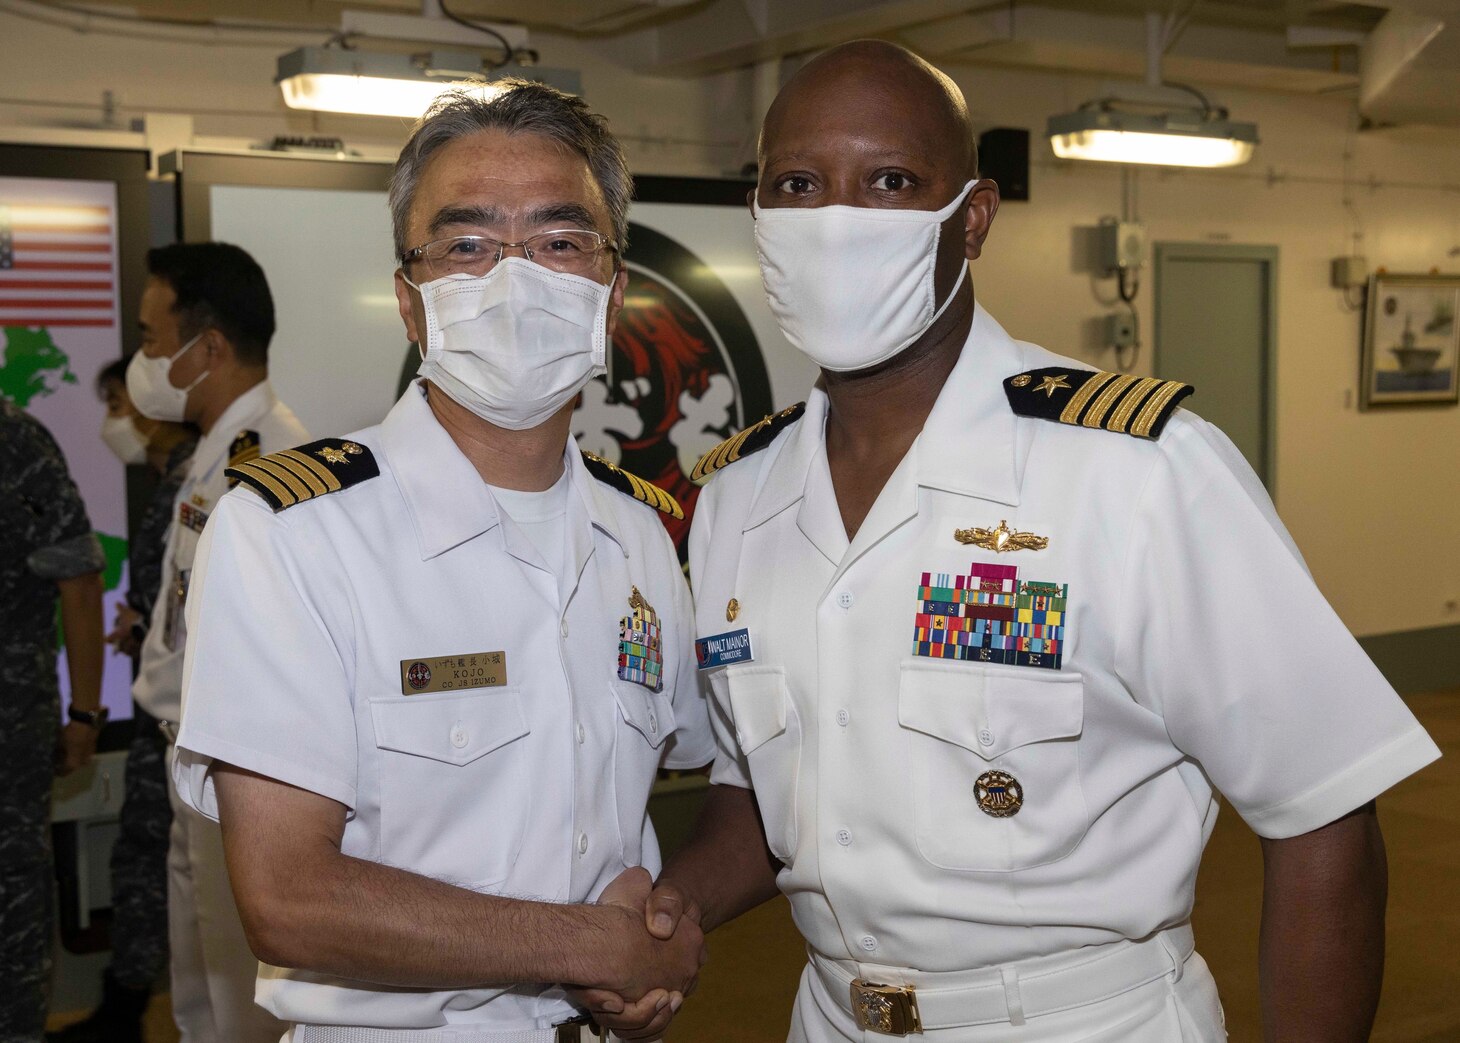 Capt. Walter Mainor, commander, Task Force 71, poses for a photo with Japan Maritime Self-Defense Force (JMSDF) Capt. Hisanori Kojo, commanding officer of JMSDF helicopter destroyer JS Izumo (DDH 183) during the opening ceremony for Pacific Vanguard (PV) 22-1 held aboard Izumo pierside at Naval Base Guam, Aug. 25. PV 22-1 is an exercise with a focus on interoperability and the advanced training and integration of allied maritime forces.